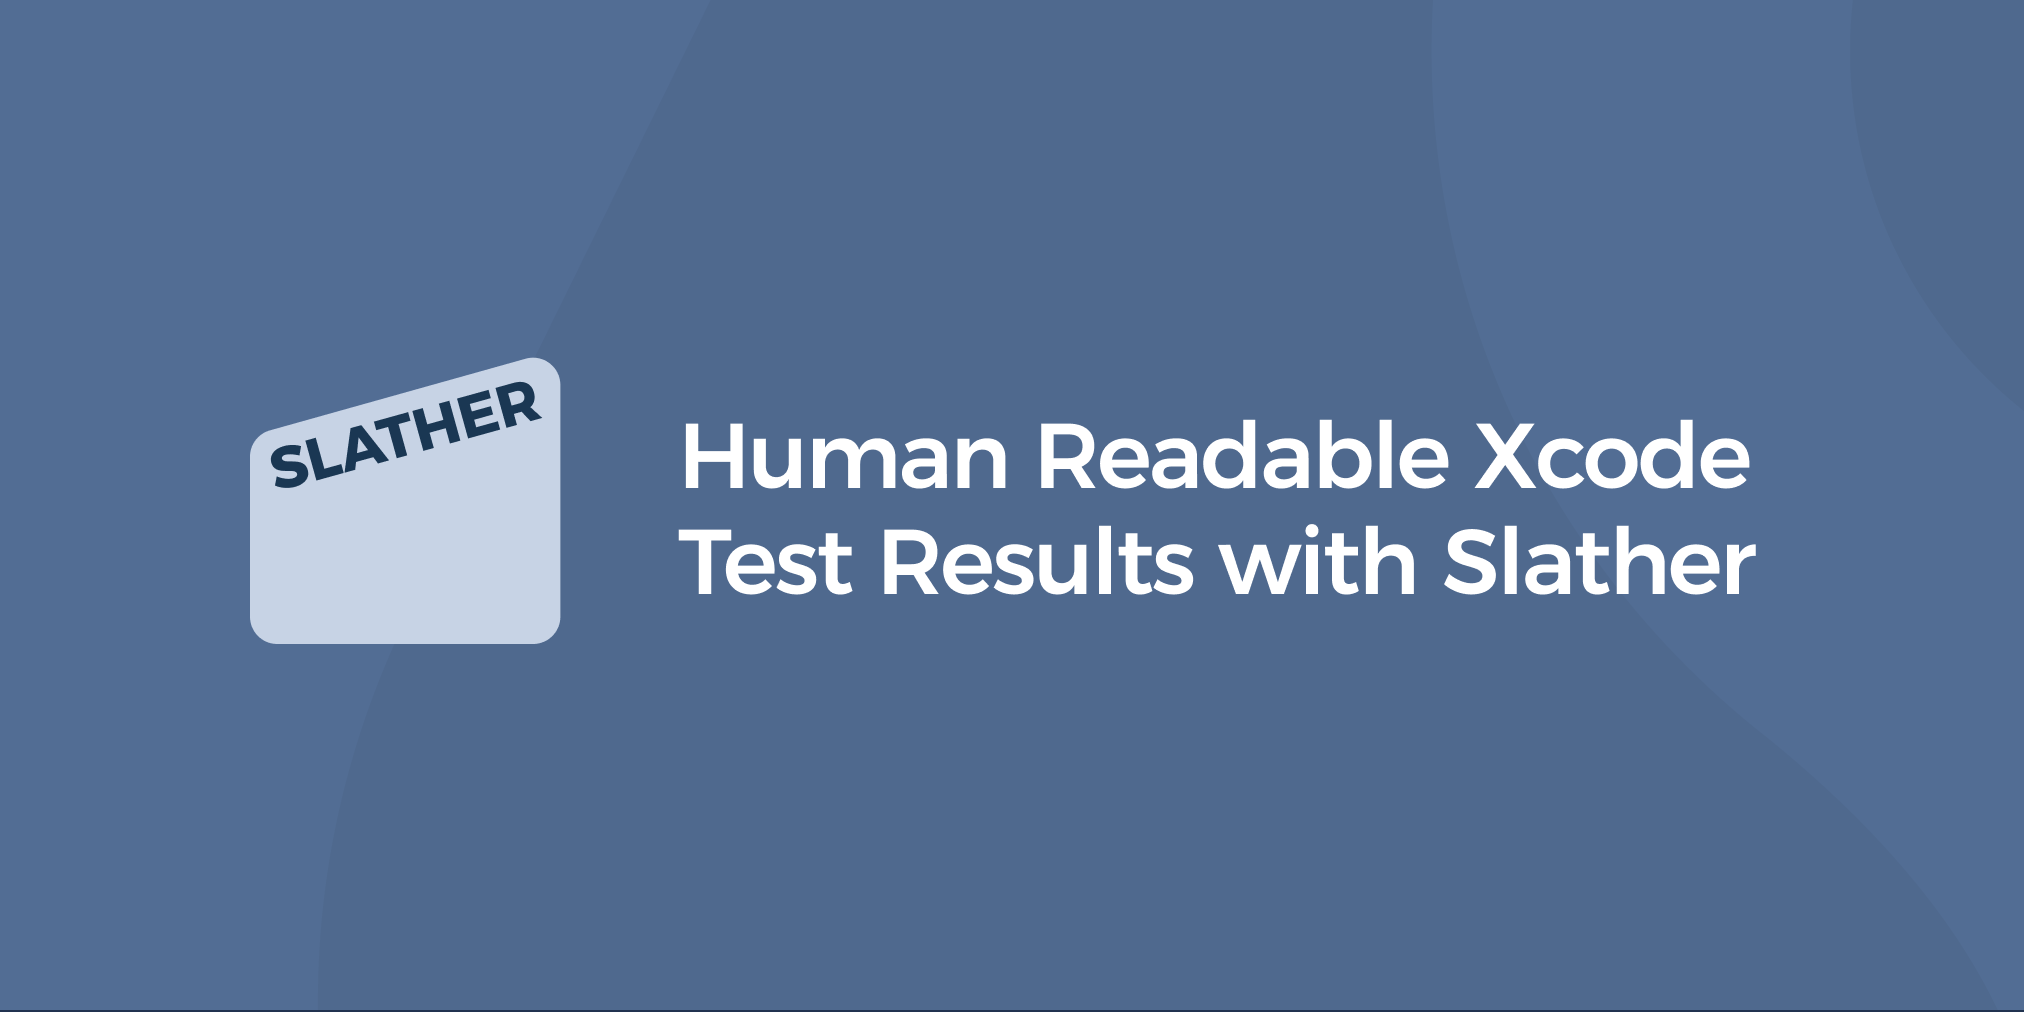 Human Readable Xcode Test Results with Slather